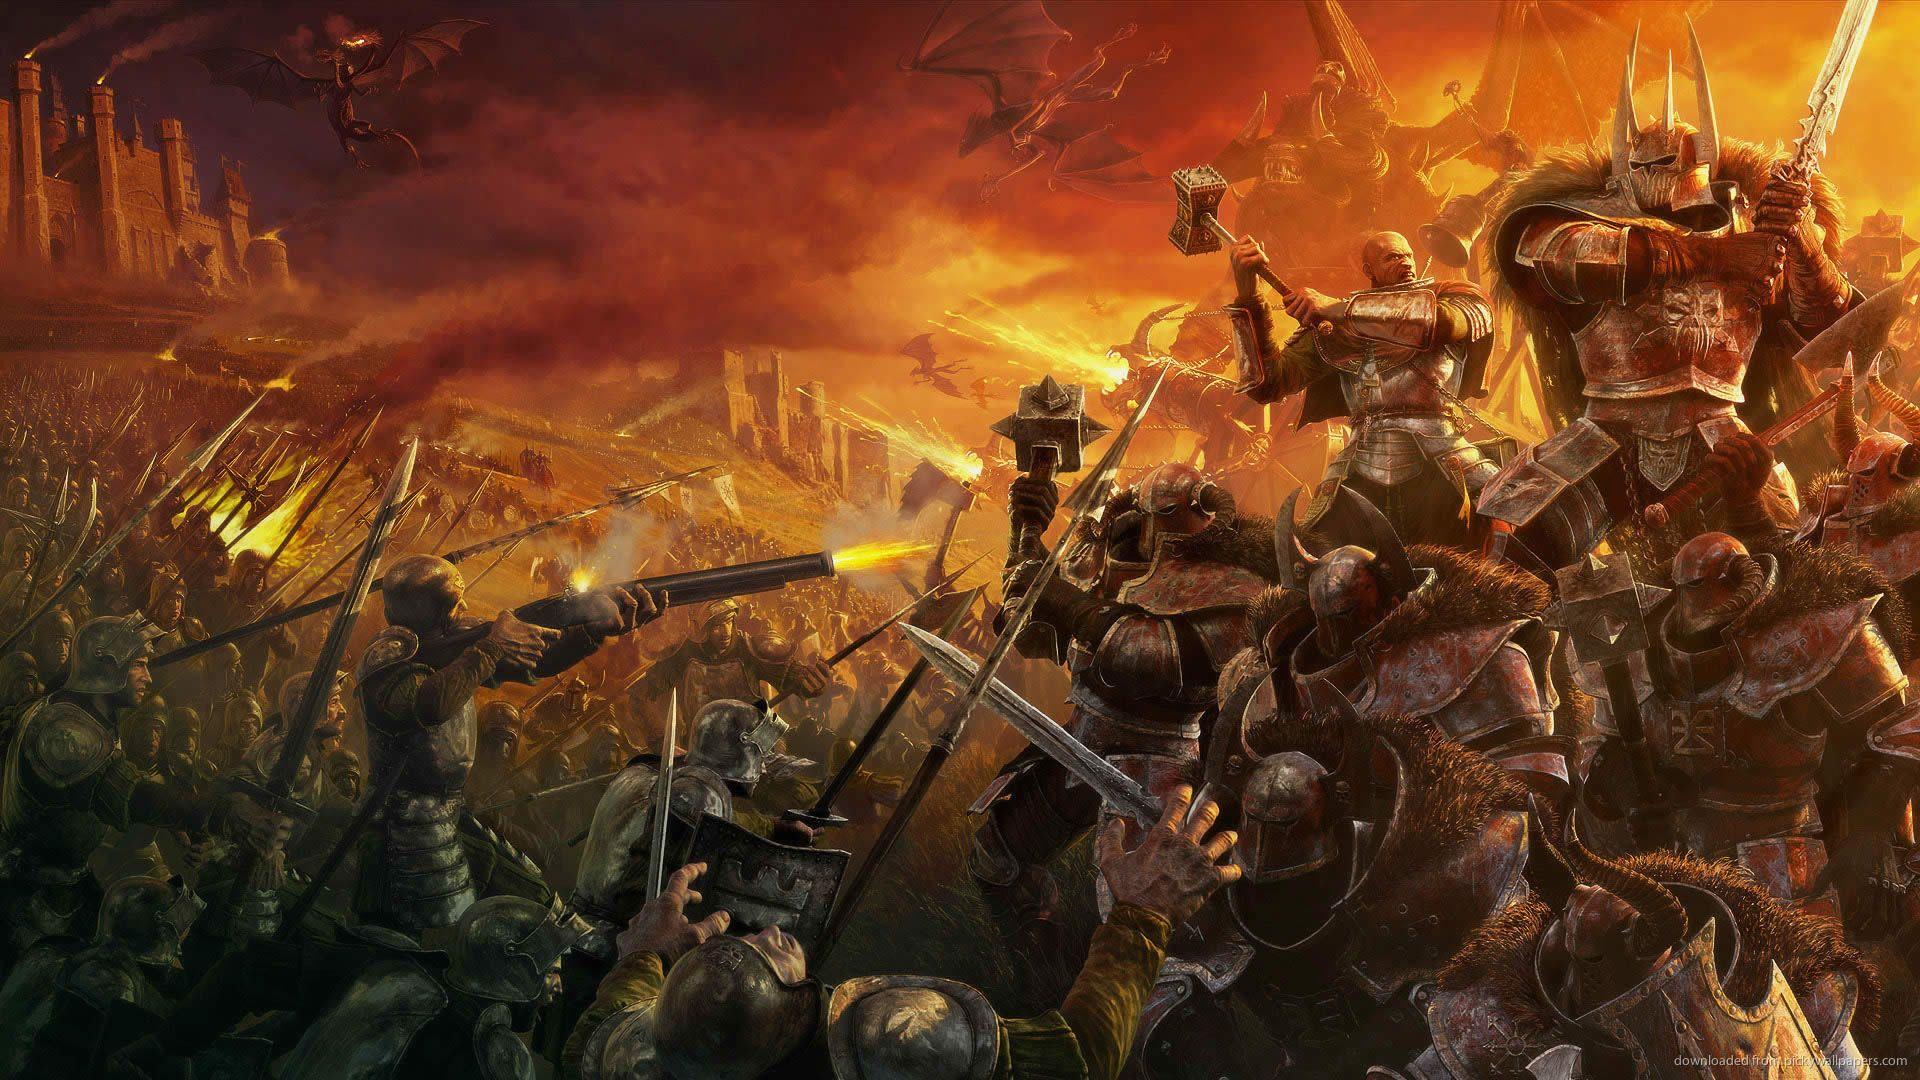 Epic Battle In Hell Wallpaper For Samsung Droid Charge